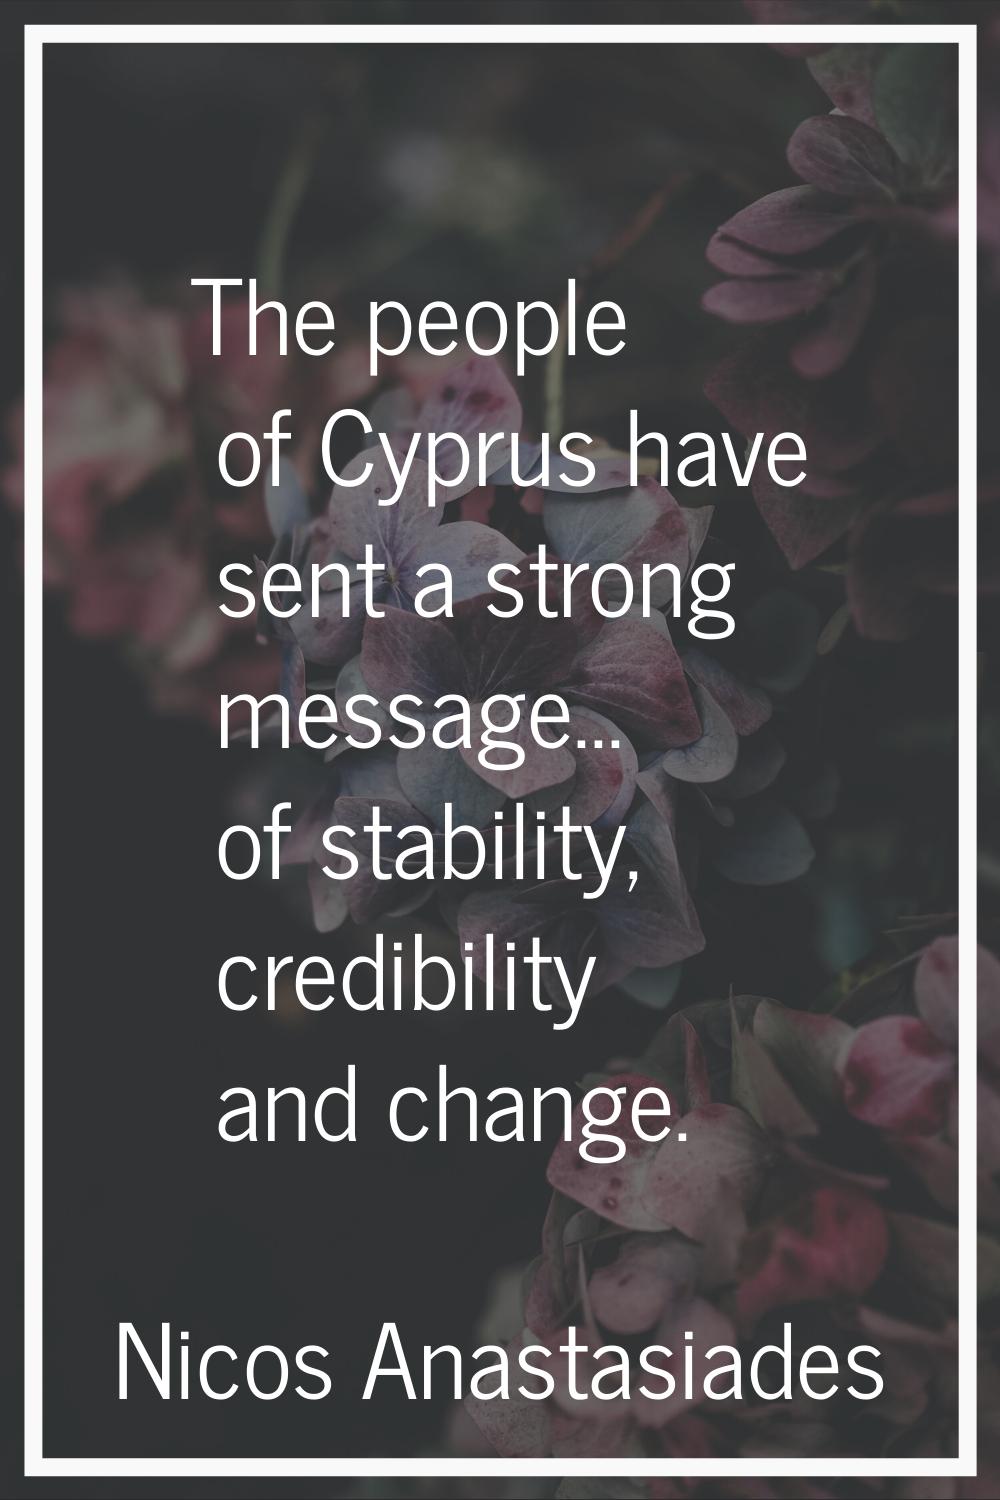 The people of Cyprus have sent a strong message... of stability, credibility and change.